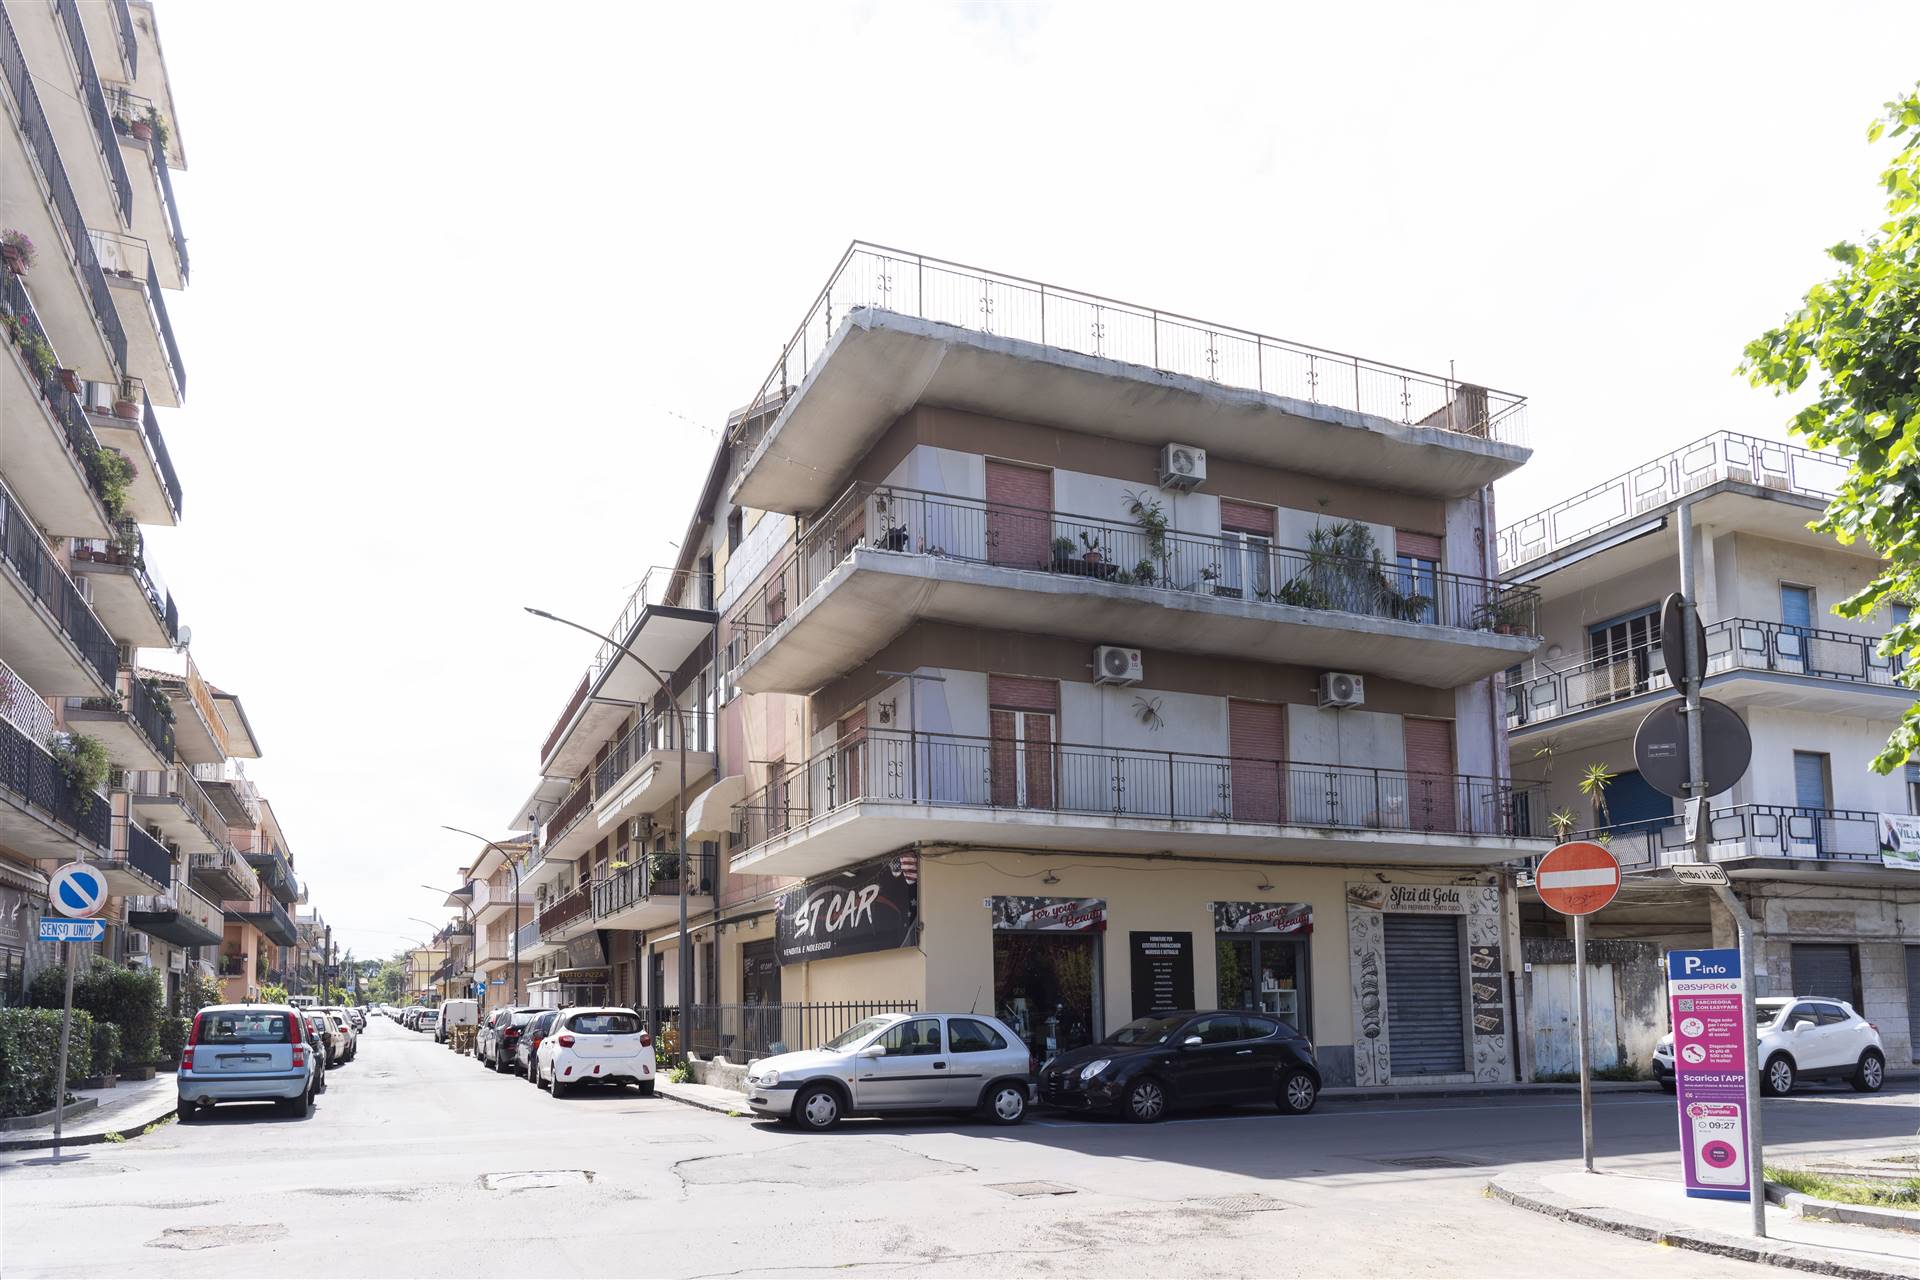 VALVERDE, Apartment for sale of 110 Sq. mt., Be restored, Heating Non-existent, Energetic class: G, placed at 1°, composed by: 4 Rooms, Separate 